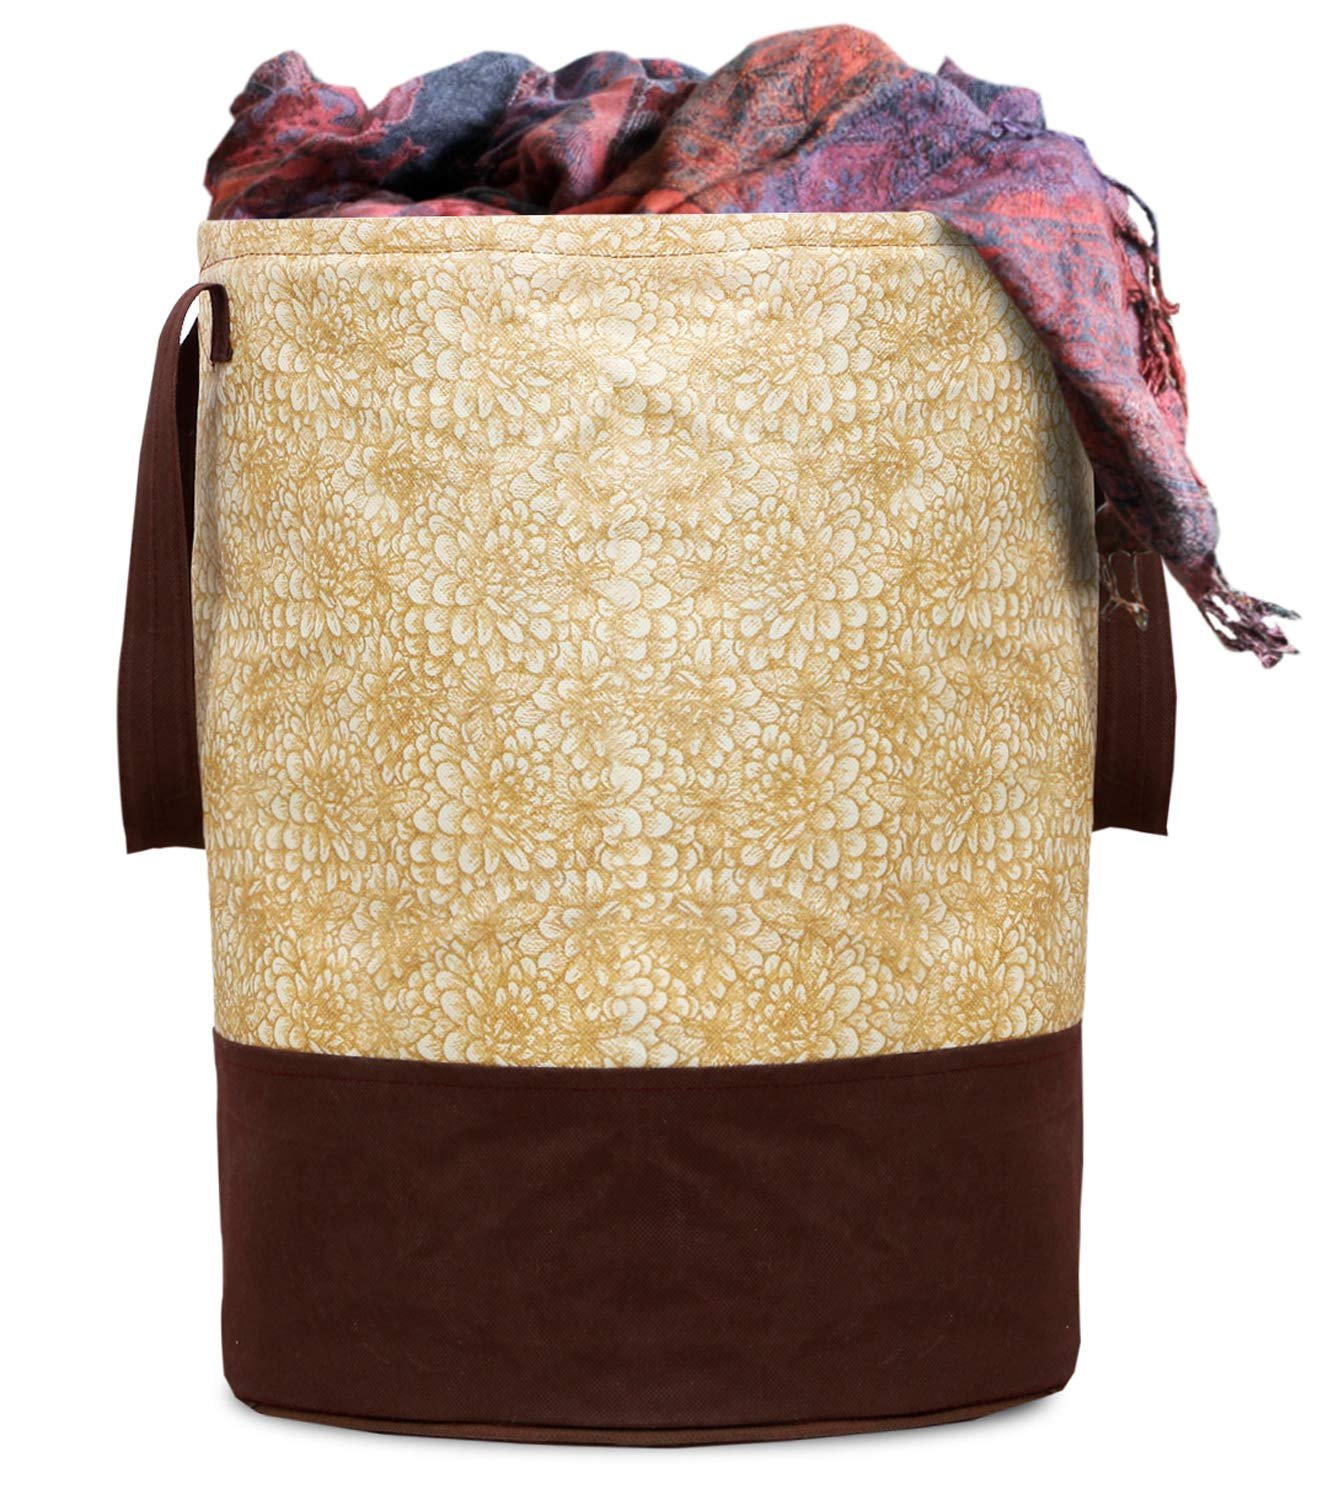 Kuber Industries Waterproof Canvas Laundry Bag/Hamper|Metalic Printed With Handles|Foldable Bin & 45 Liter Capicity|Size 37 x 37 x 46, Pack of 1 (Brown)